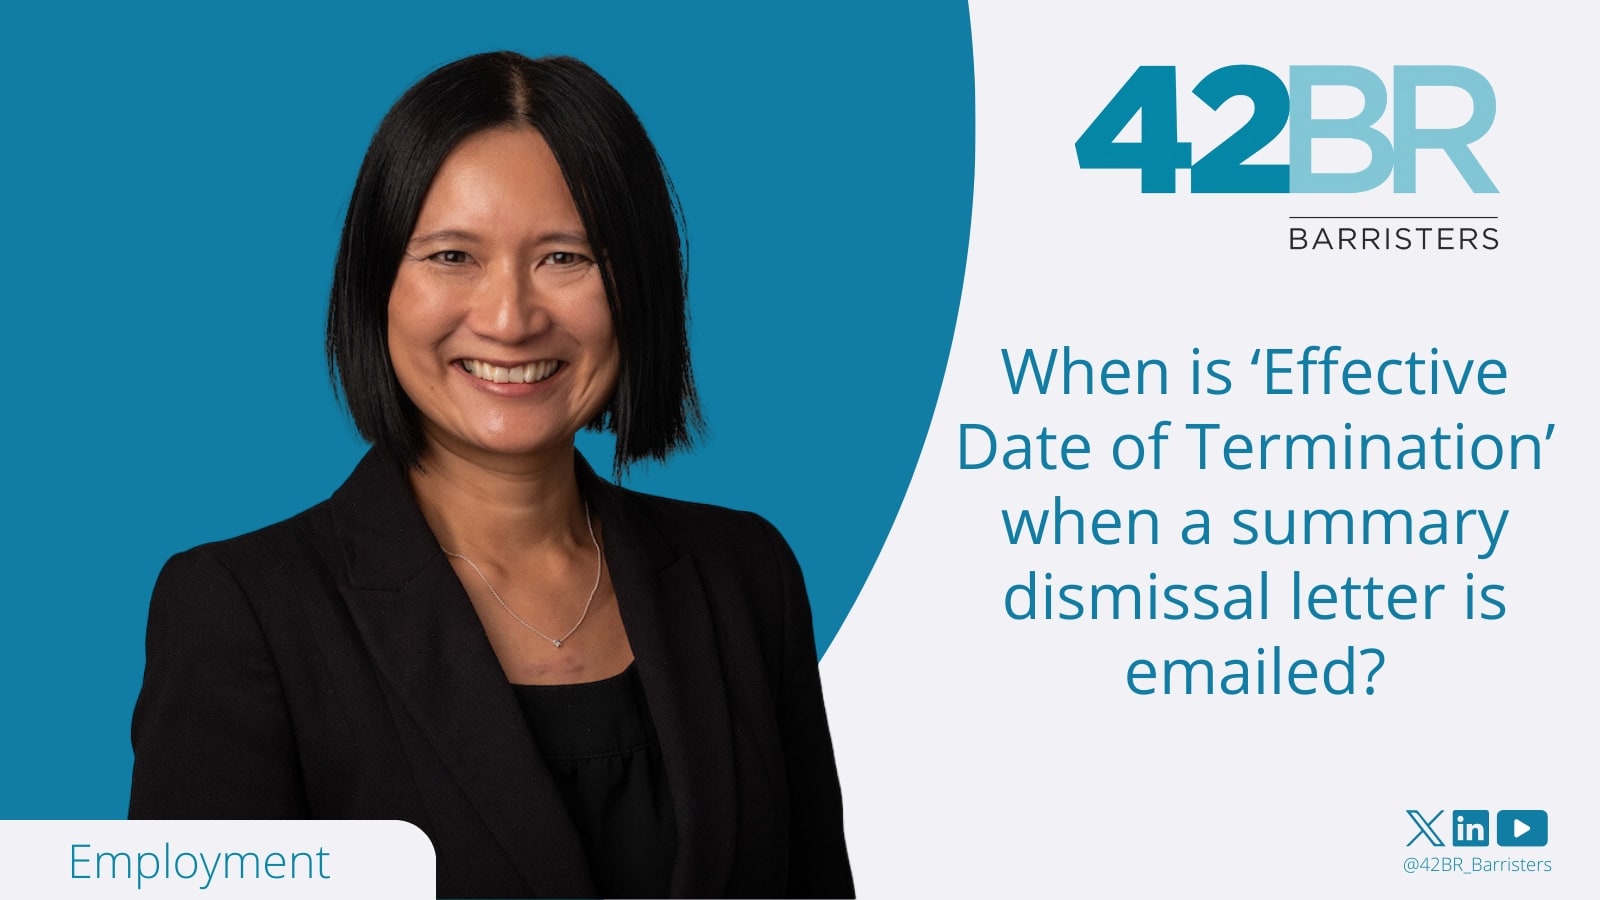 When is 'Effective Date of Termination' when a summary dismissal letter is emailed?